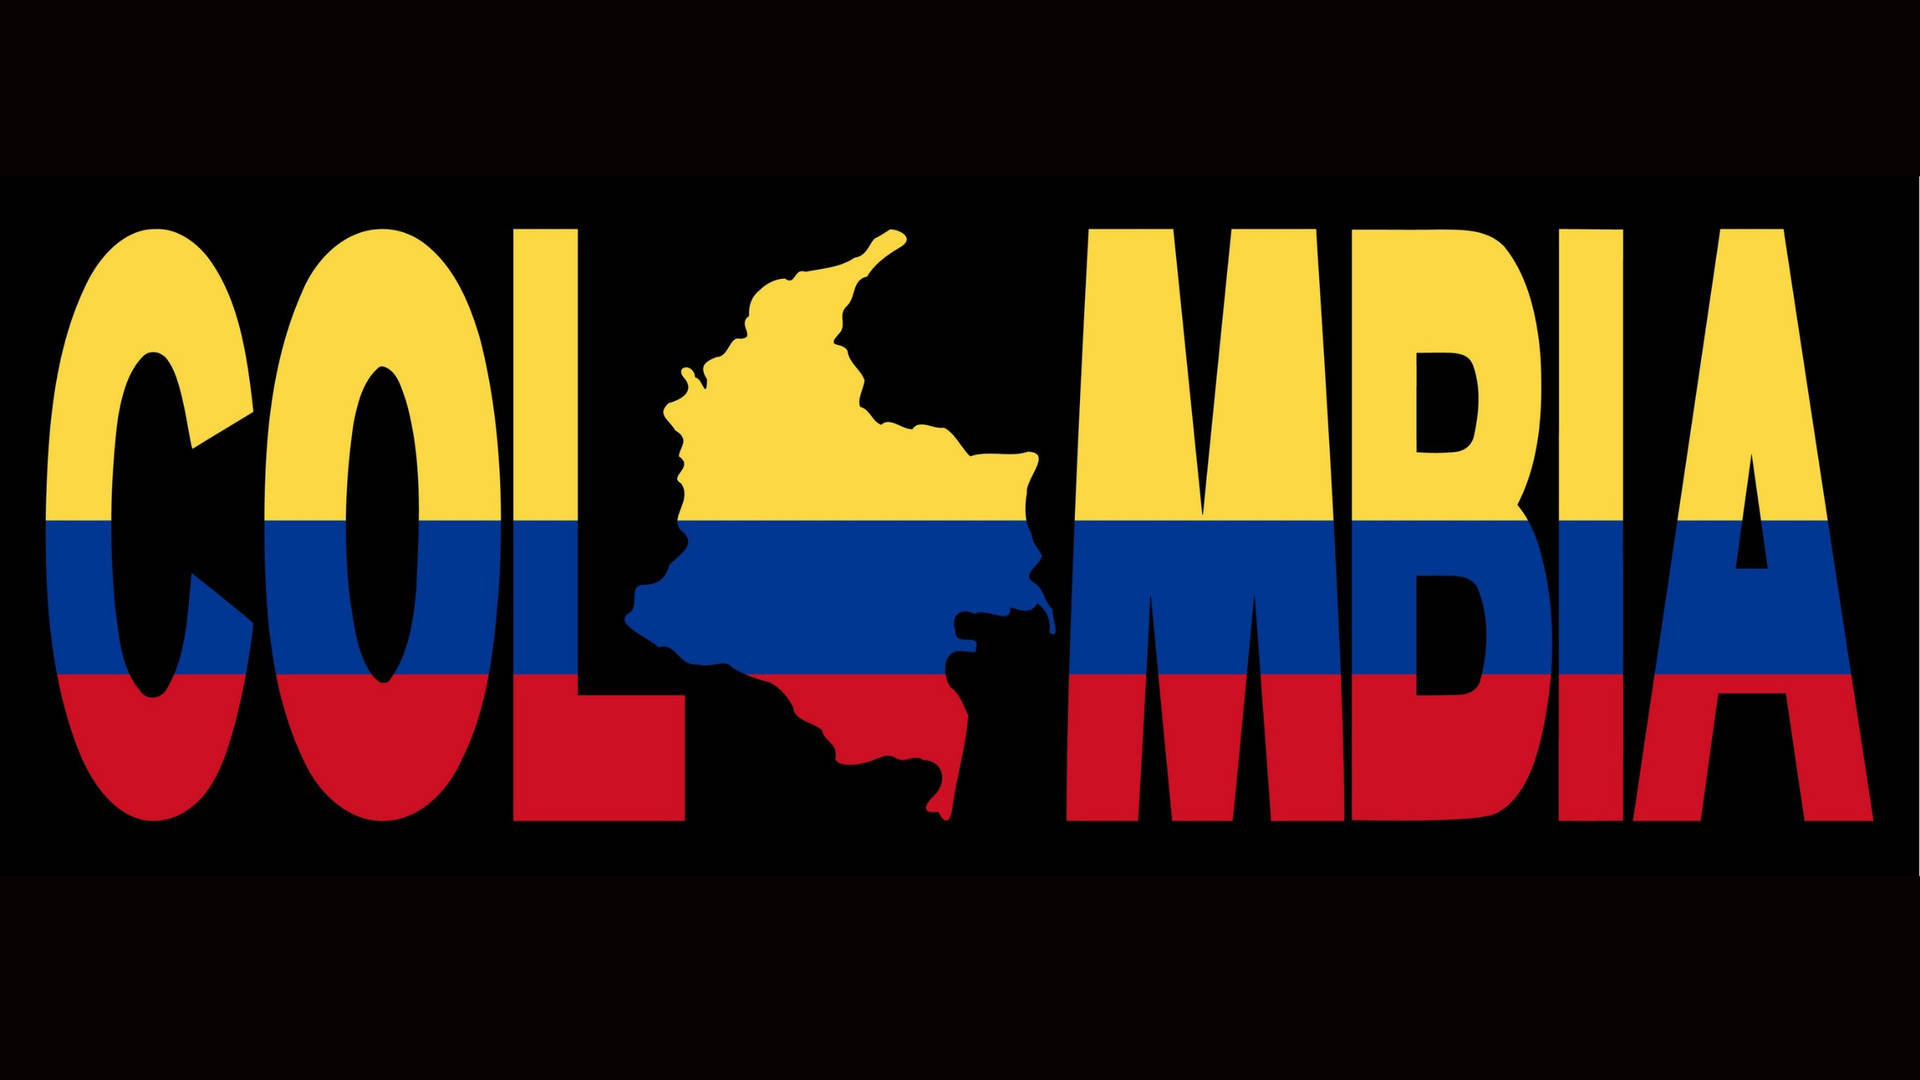 Colombia Flag And Map Wallpaper